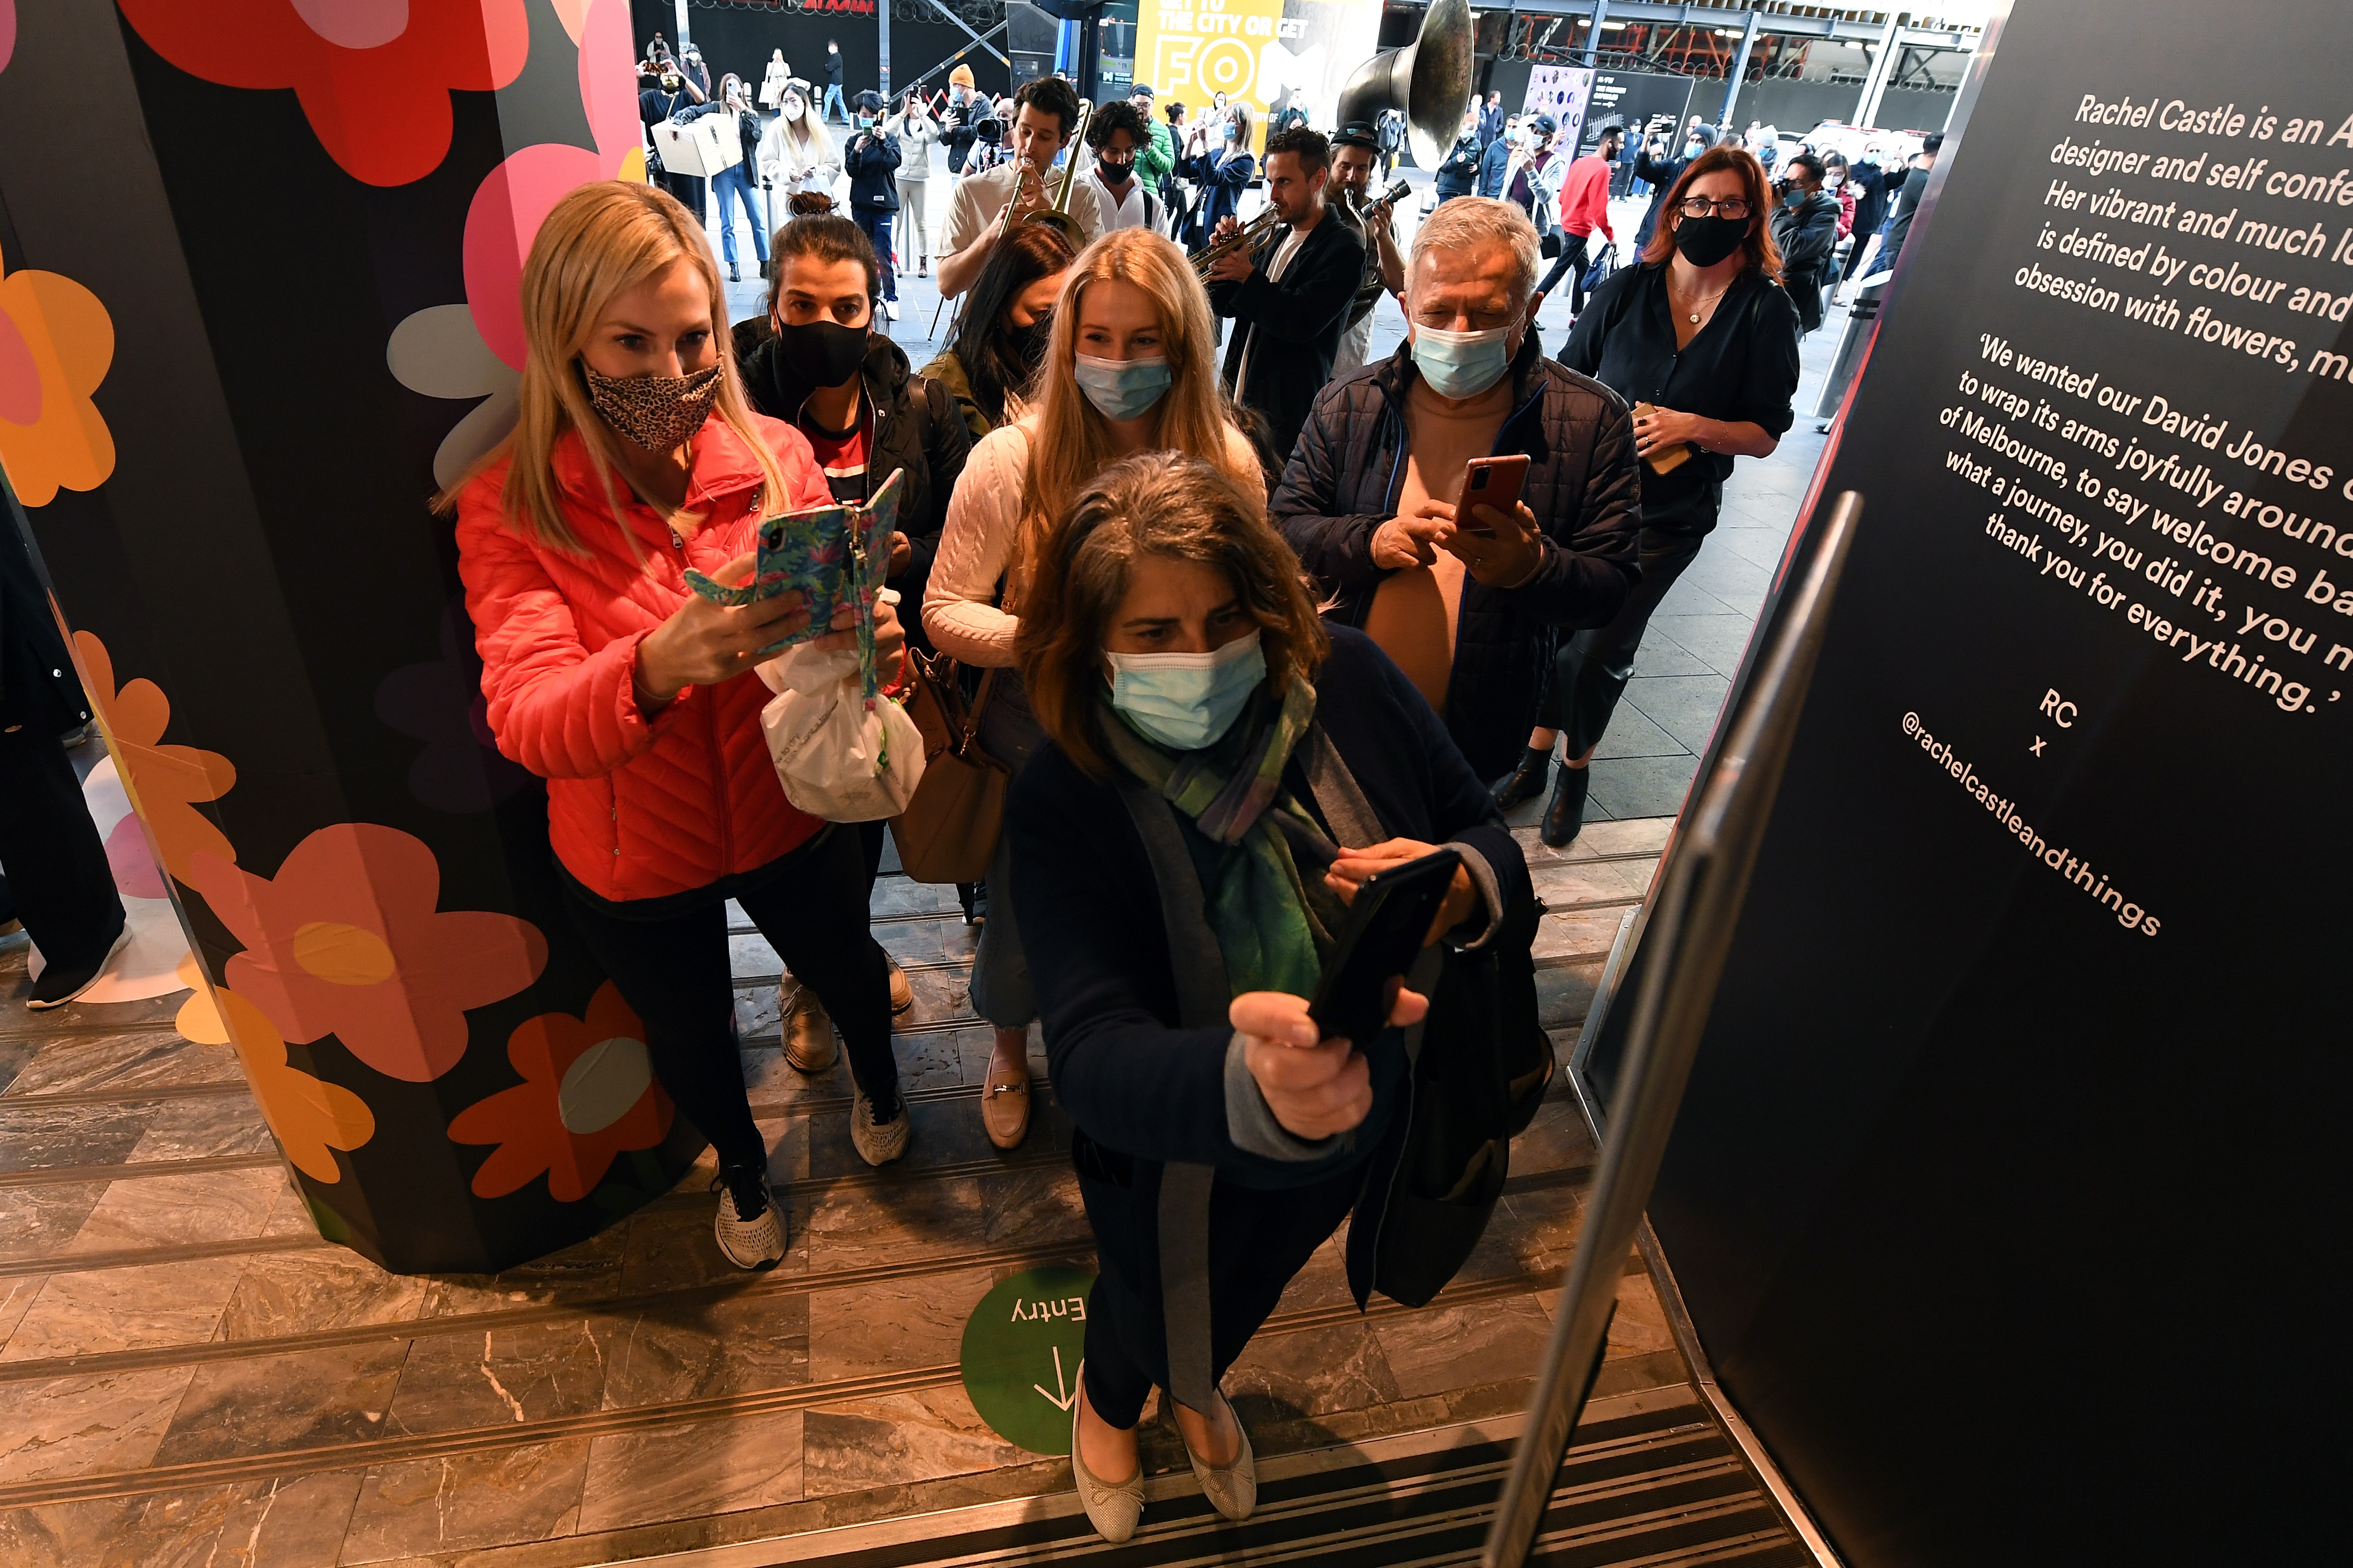 People use a QR code before entering the David Jones retail store in Melbourne, Friday, October 29, 2021. At 6pm, the border between Melbourne and the regions will come down, masks will no longer need to be worn outdoors, indoor entertainment venues, gyms